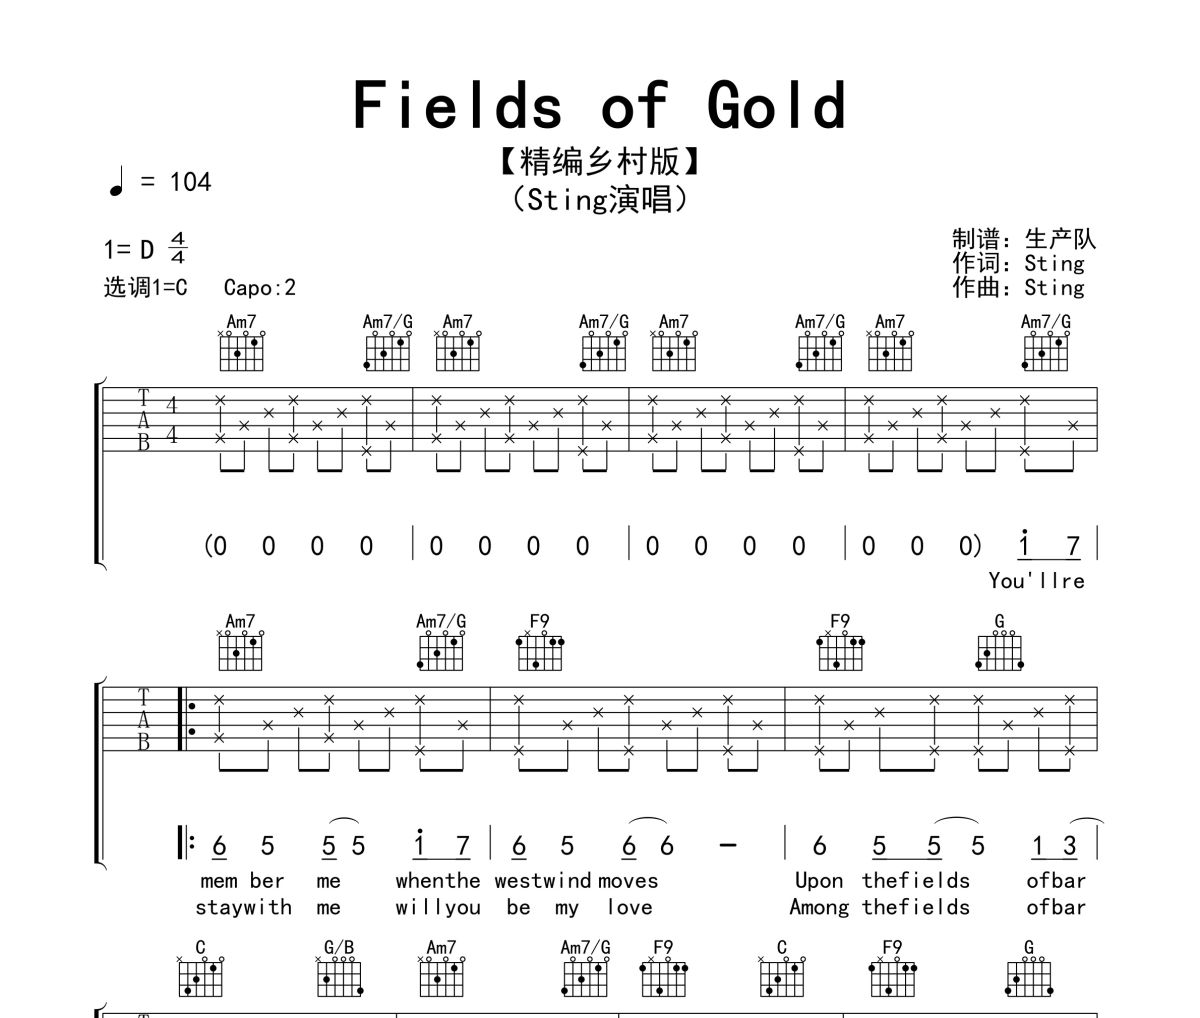 Fields of Gold吉他谱 Sting《Fields of Gold》六线谱|吉他谱